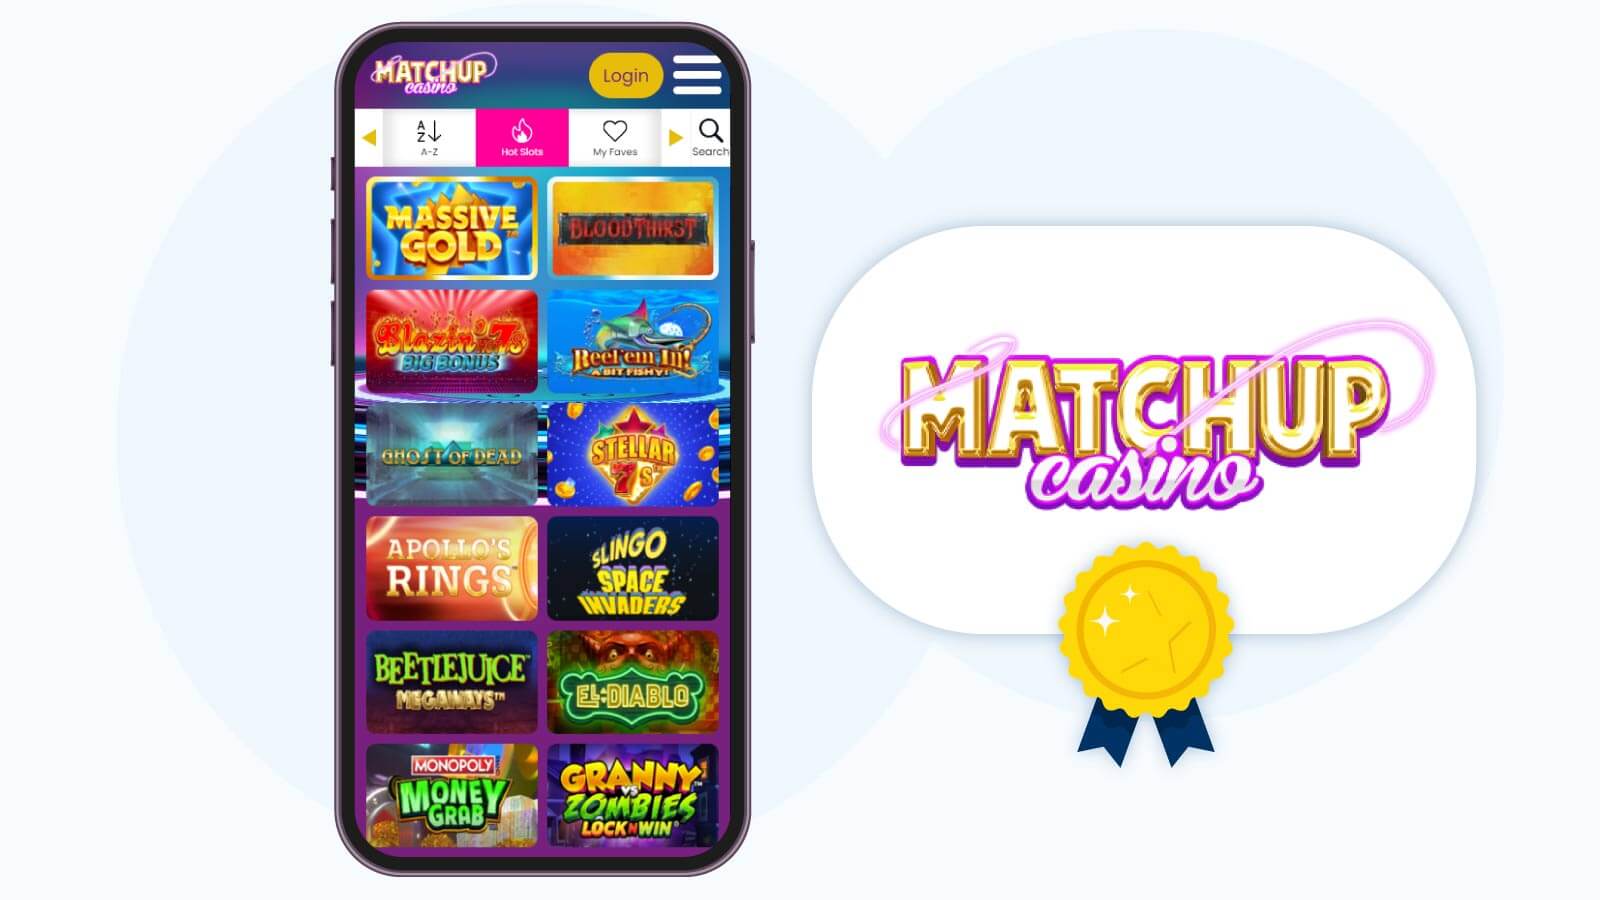 Matchup Casino – our recommended mobile casino with 200 bonus